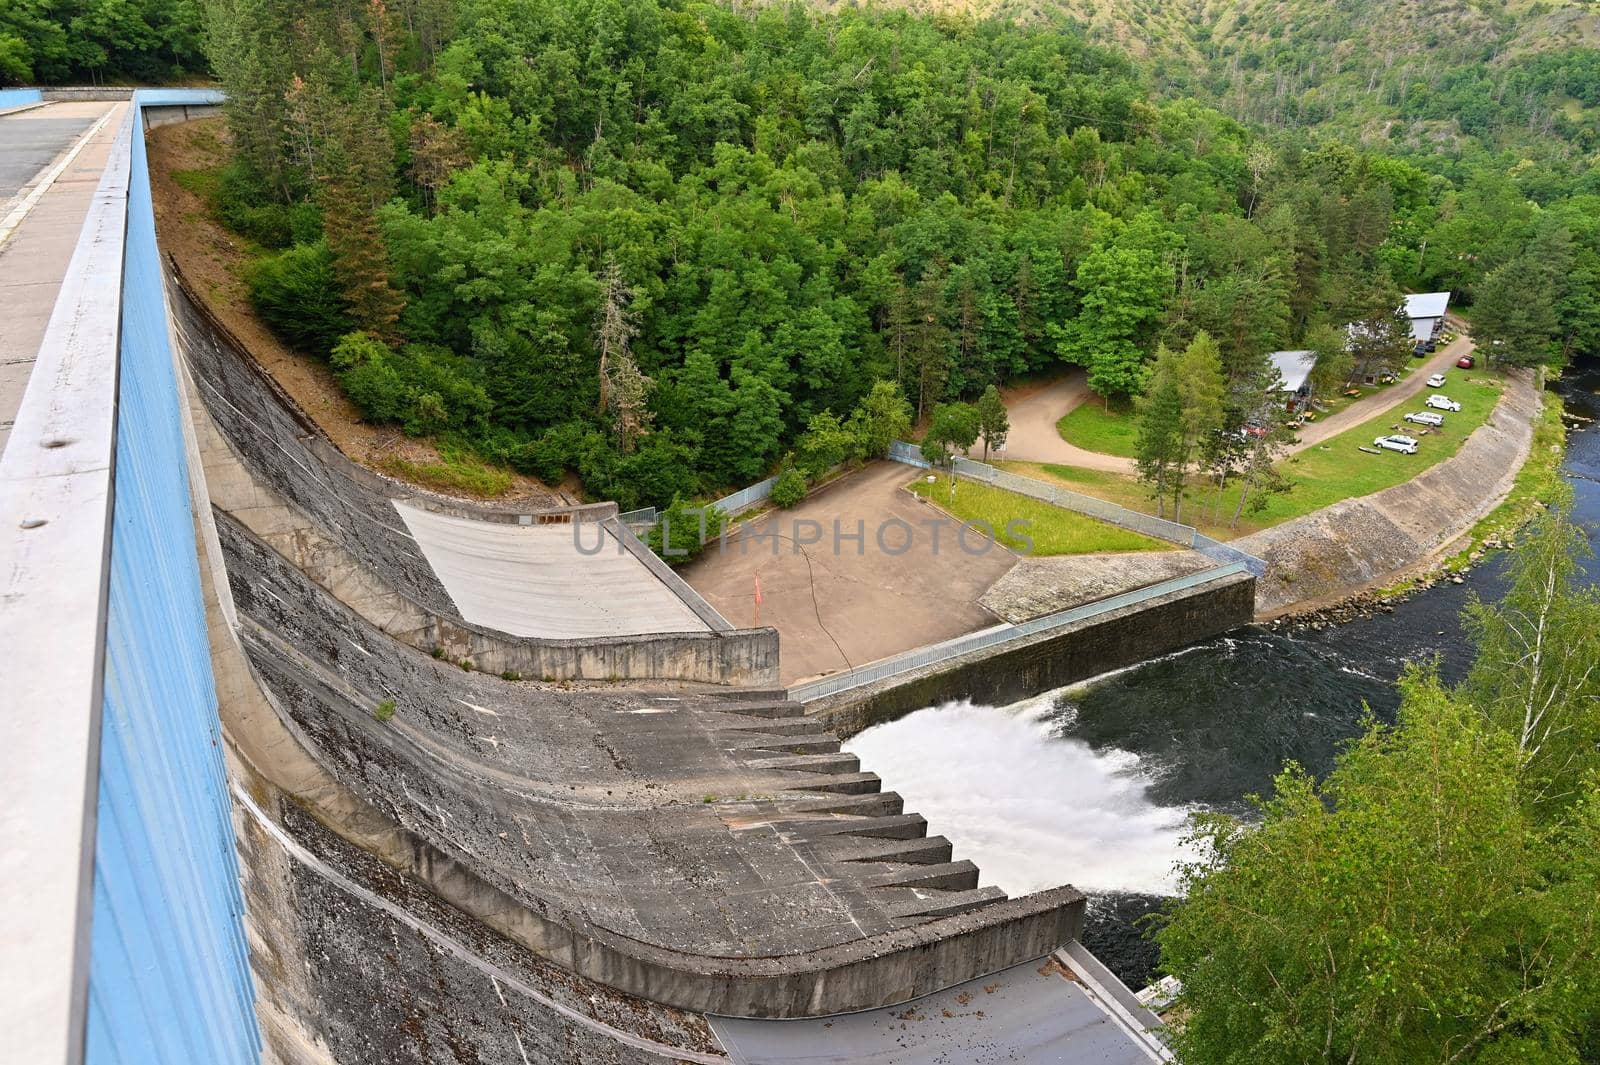 Hydroelectric power station - run-of-river hydroelectric power station. Kaplan turbine. Mohelno-Czech Republic.